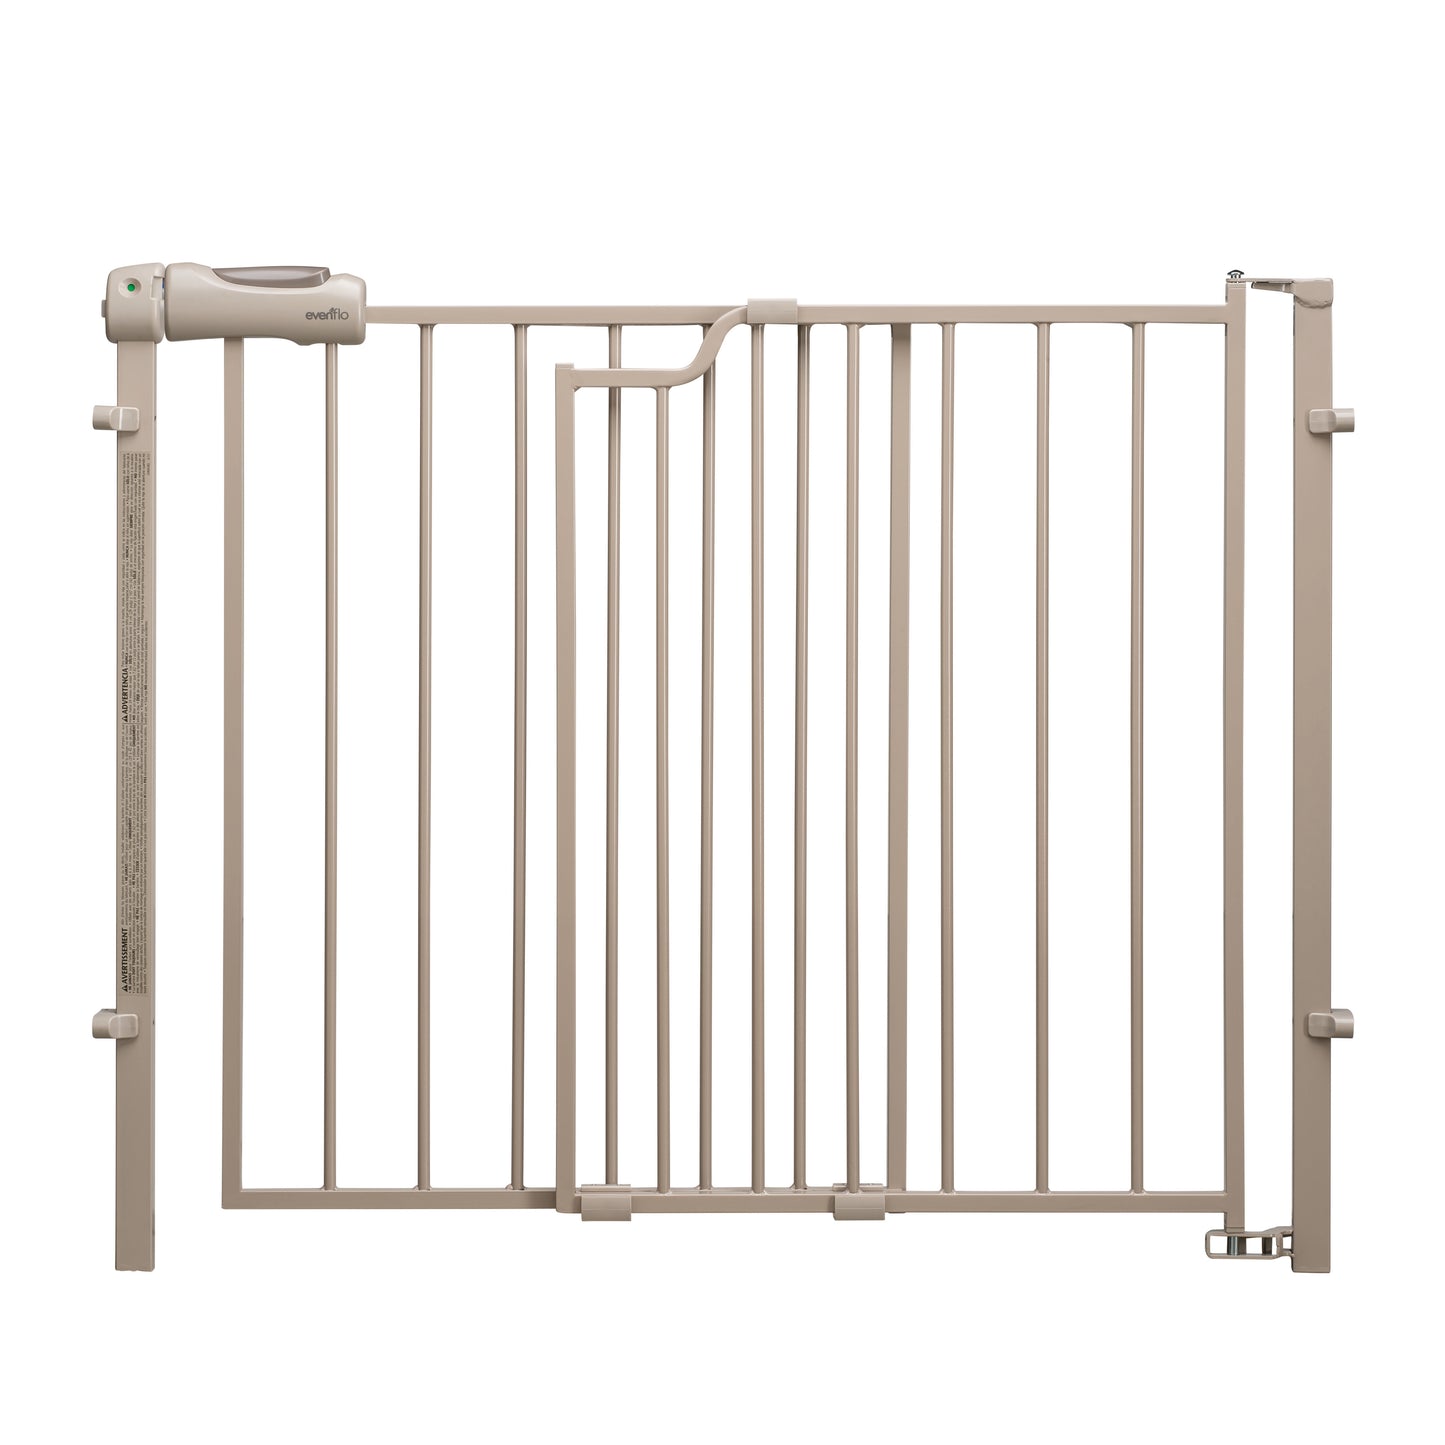 Secure Step Baby Gate